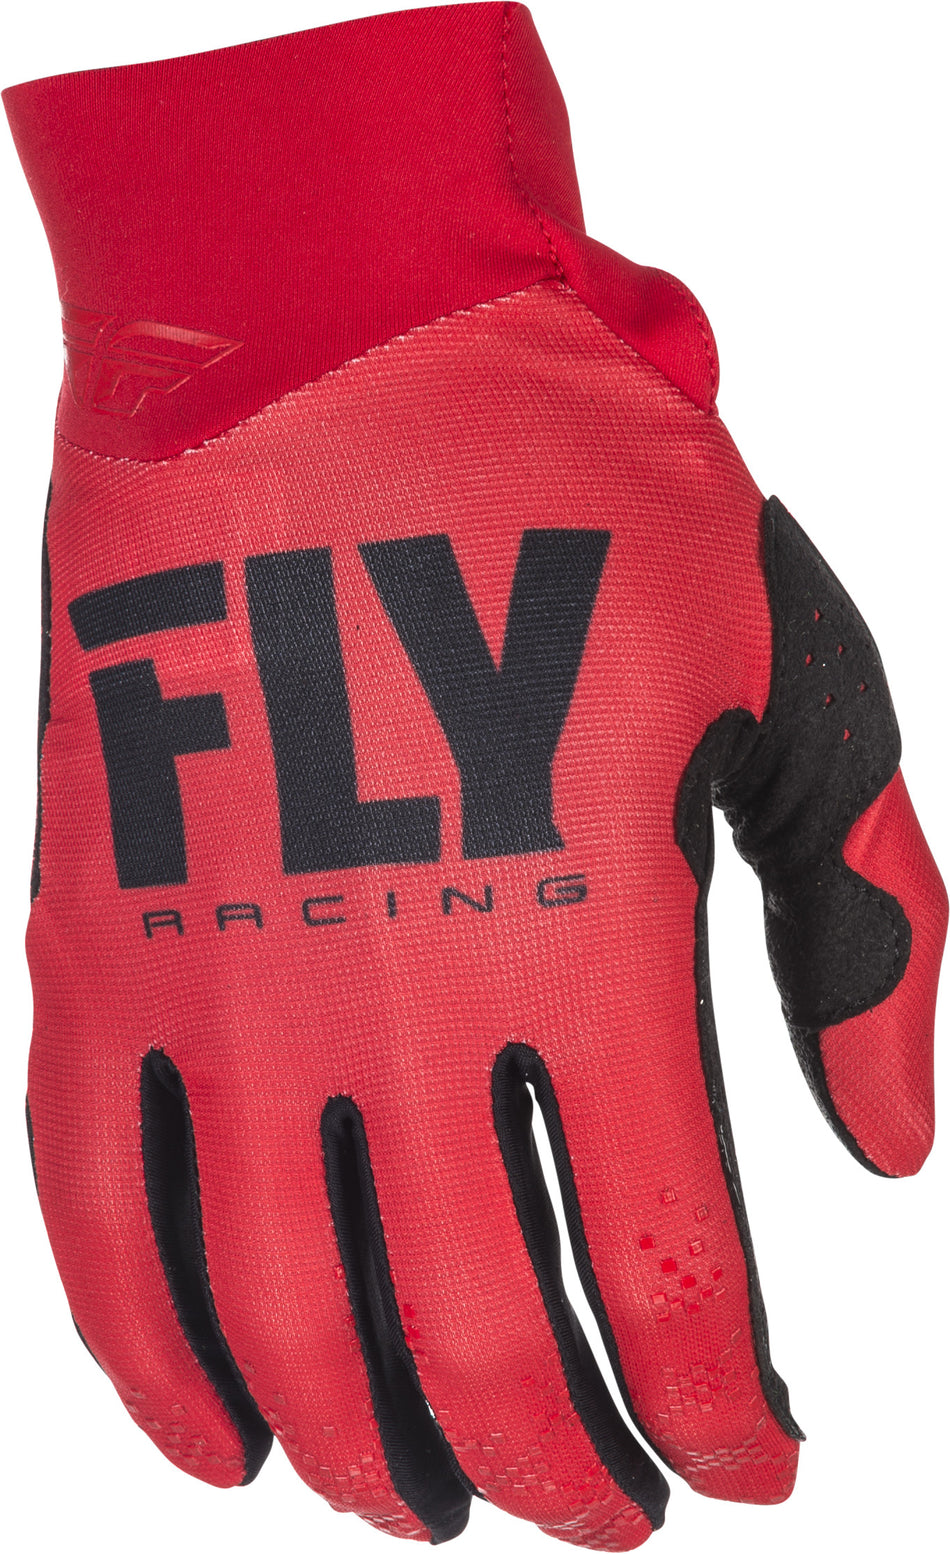 FLY RACING Pro Lite Gloves Red Sz 6 371-81206